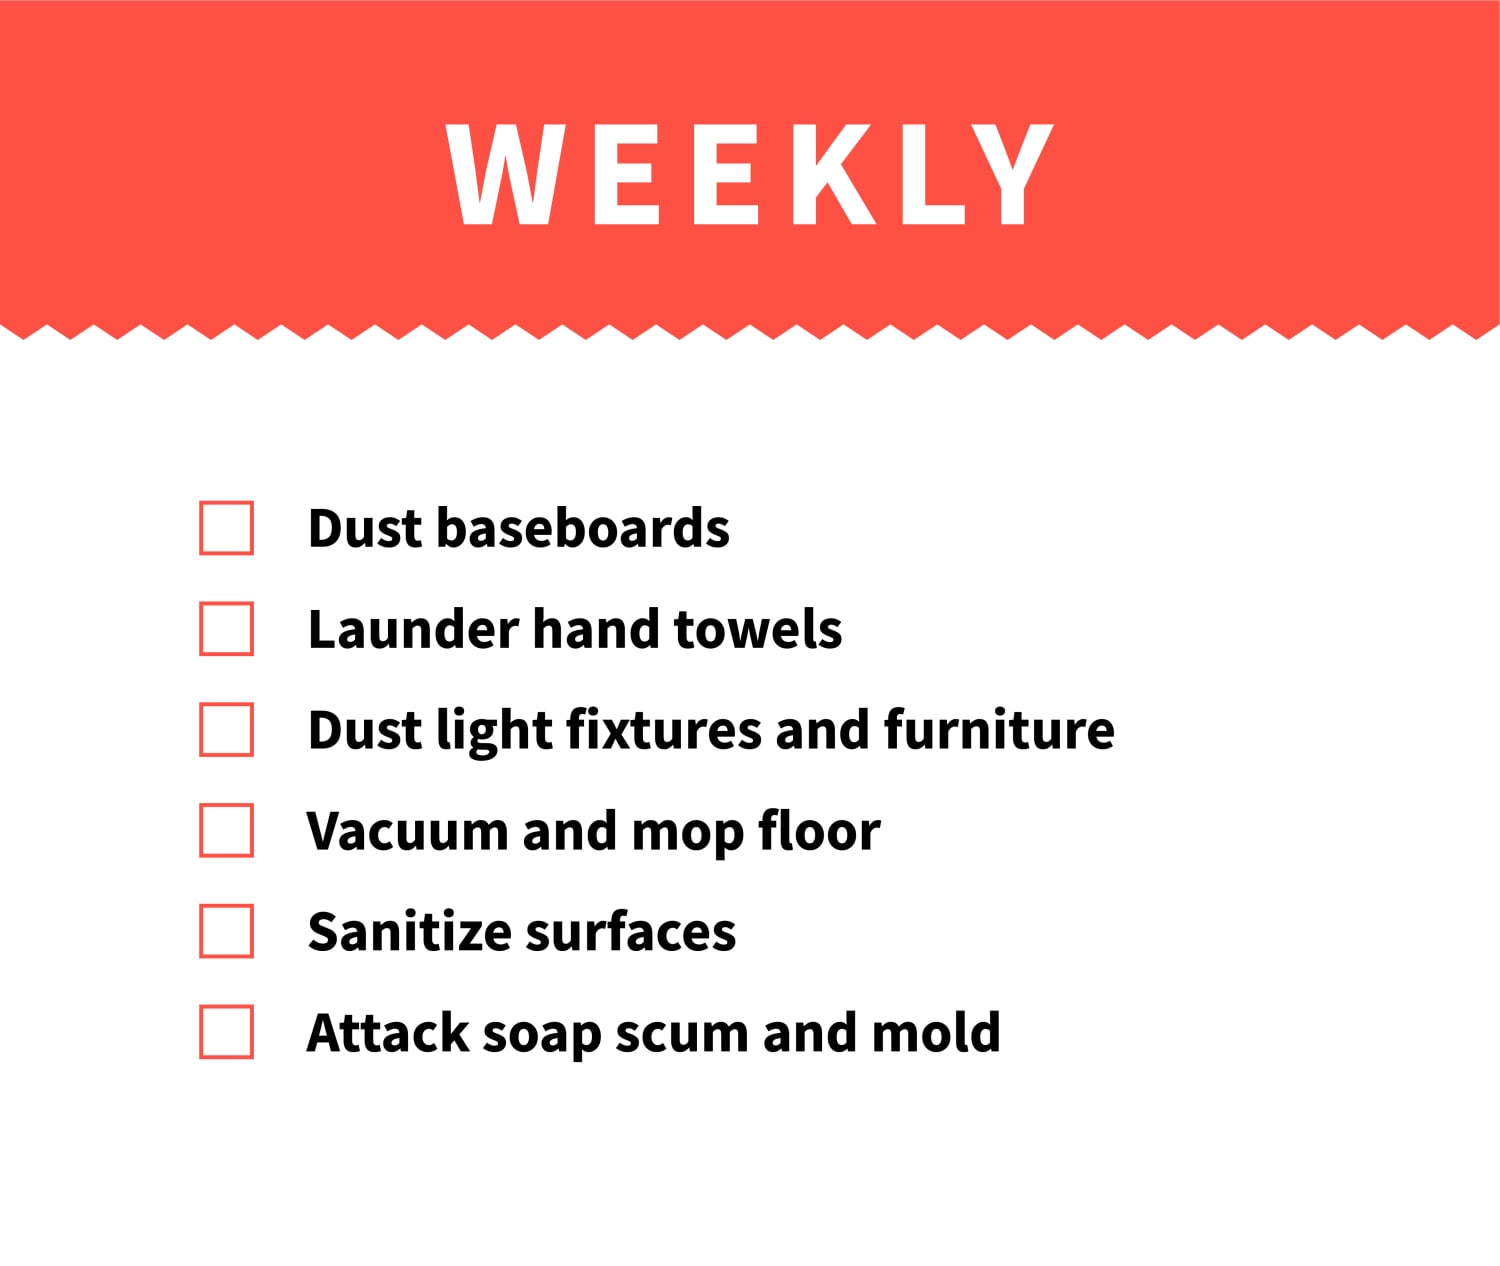 https://media-cldnry.s-nbcnews.com/image/upload/rockcms/2023-03/weekly-bathroom-cleaning-checklist-ls-230310-c6e37a.jpg